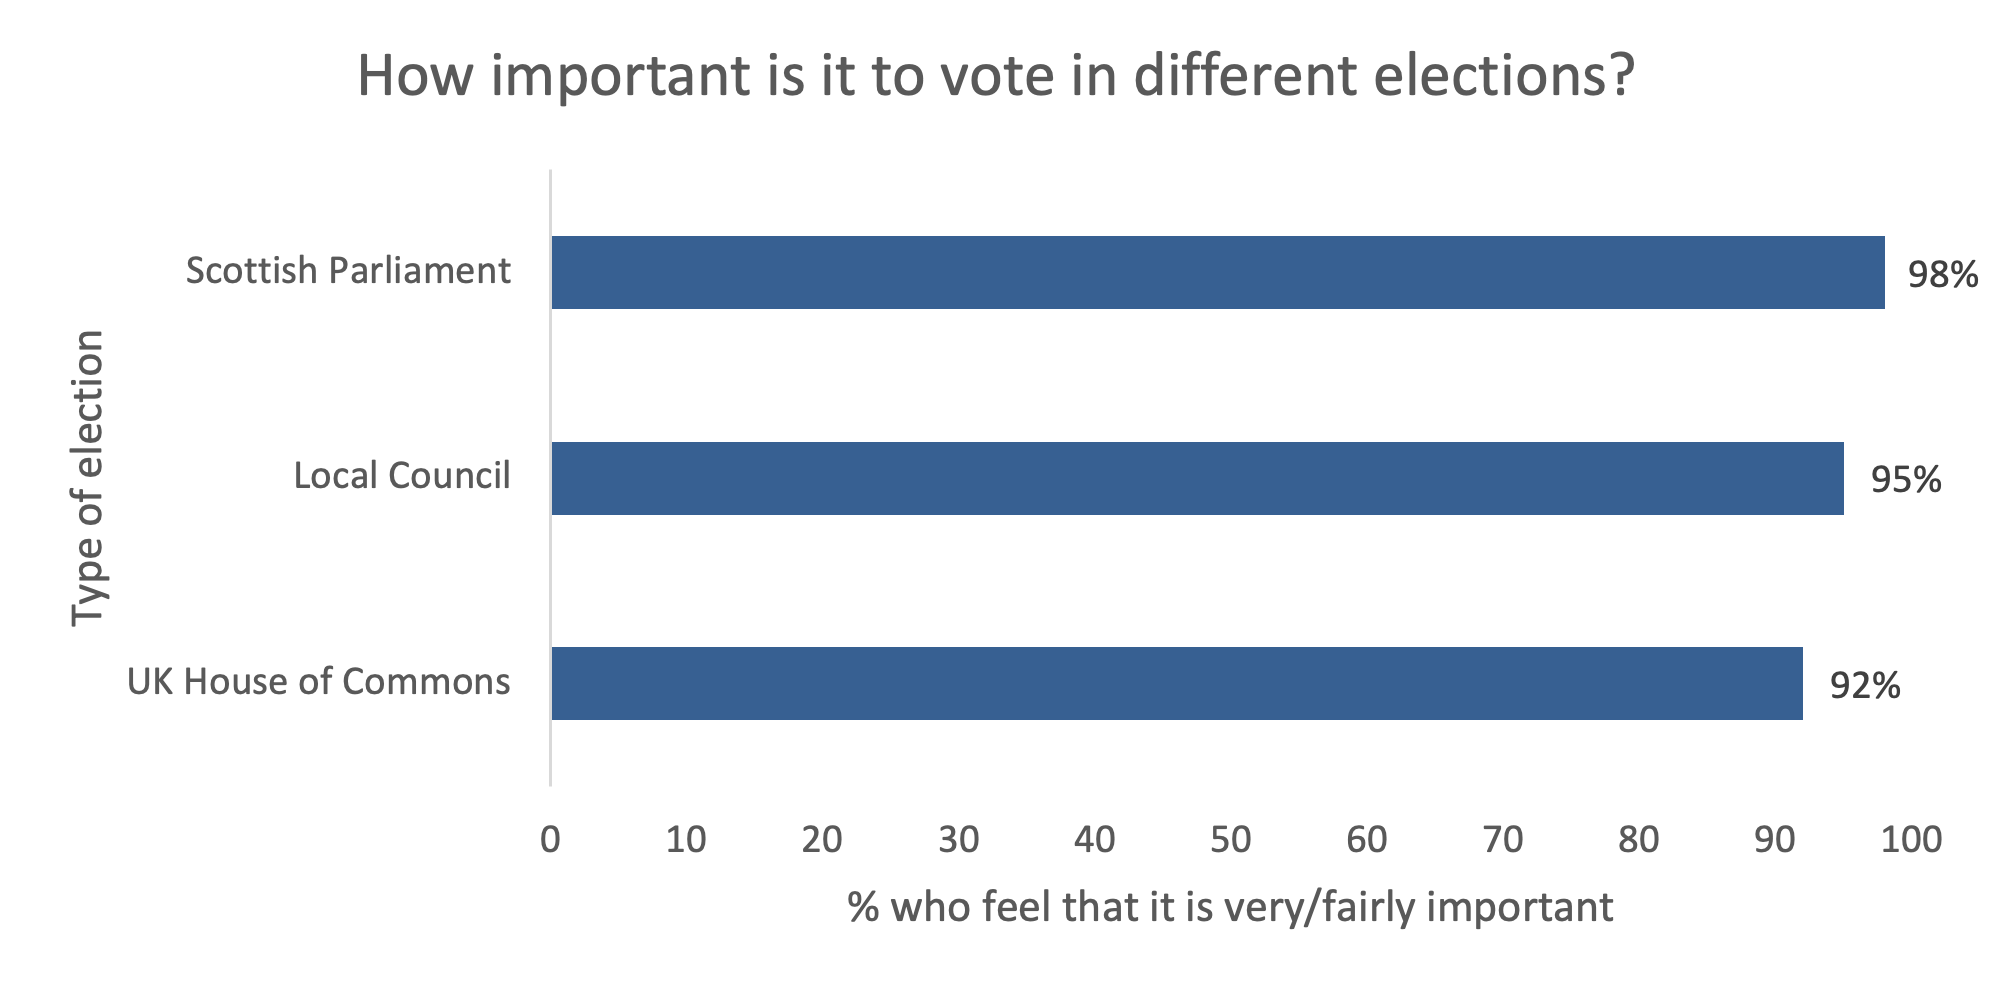 Bar chart visualising the proportions of respondents who agree that it is important to vote in Scottish Parliament, UK House of Commons and Local Government elections. The chart shows that the majority of respondents agree that it is important to vote in all of these elections.